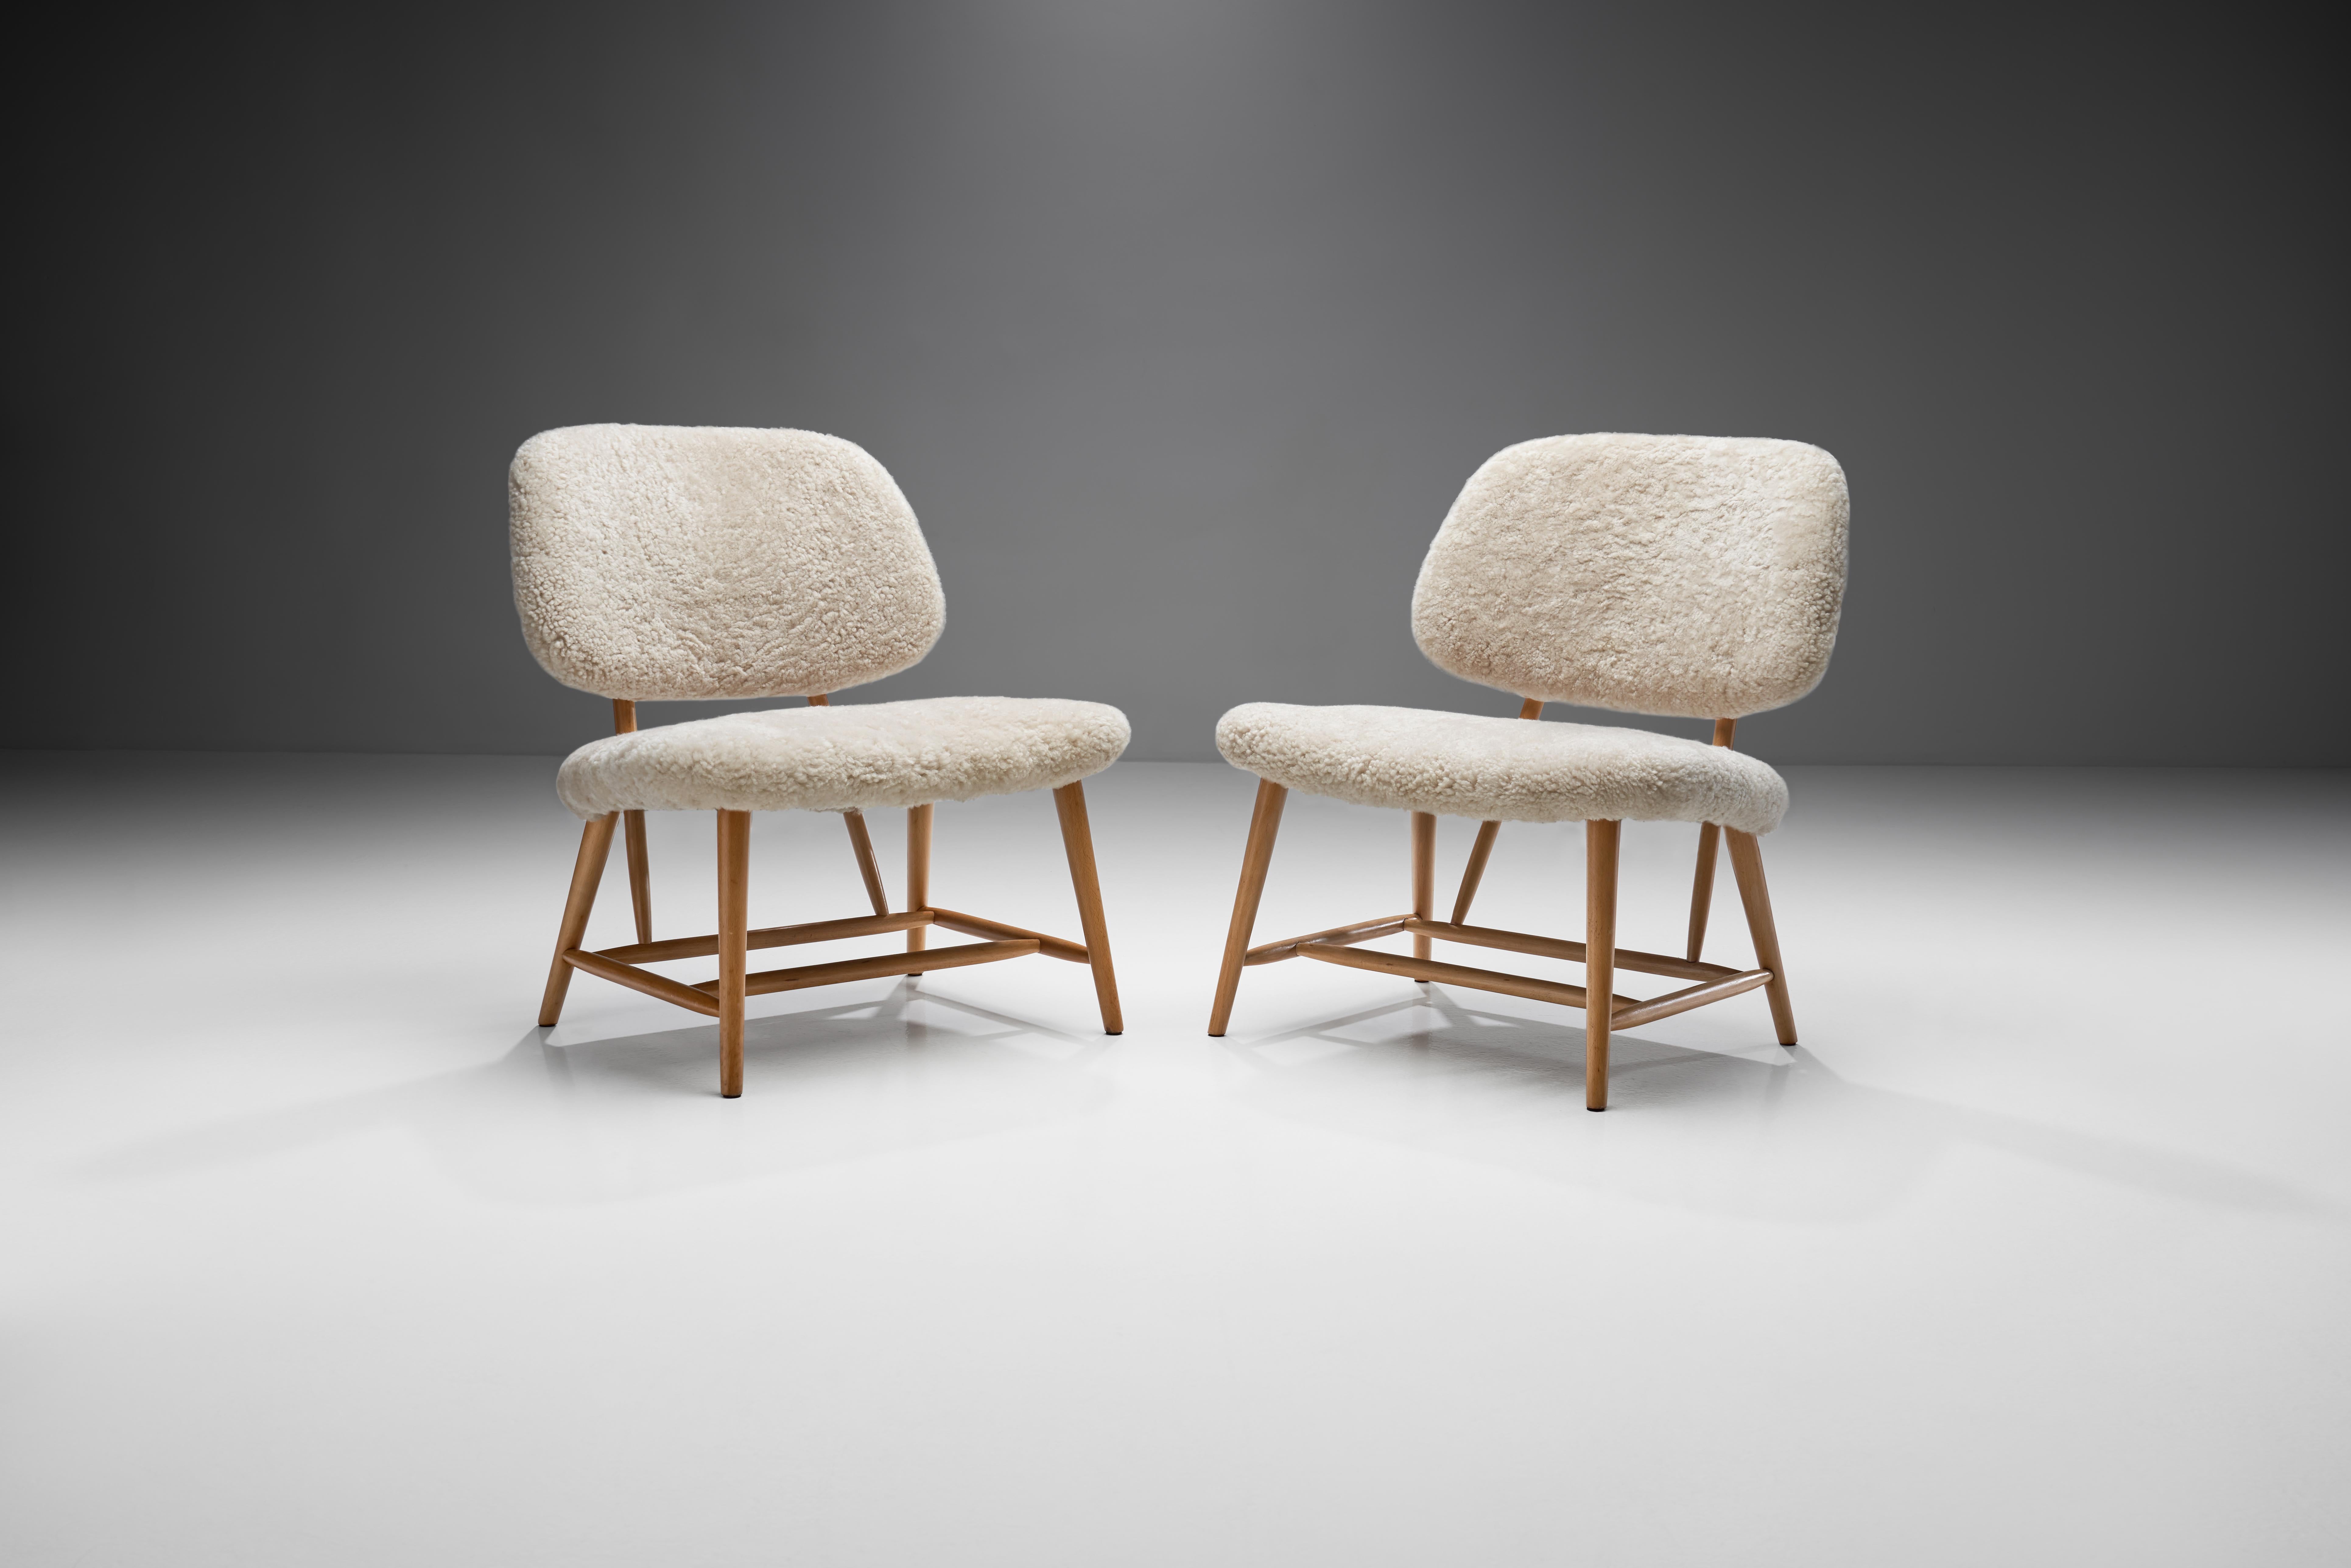 Swedish Pair of “TeVe” Chairs by Alf Svensson for Studio Ljungs Industrier AB, SWE